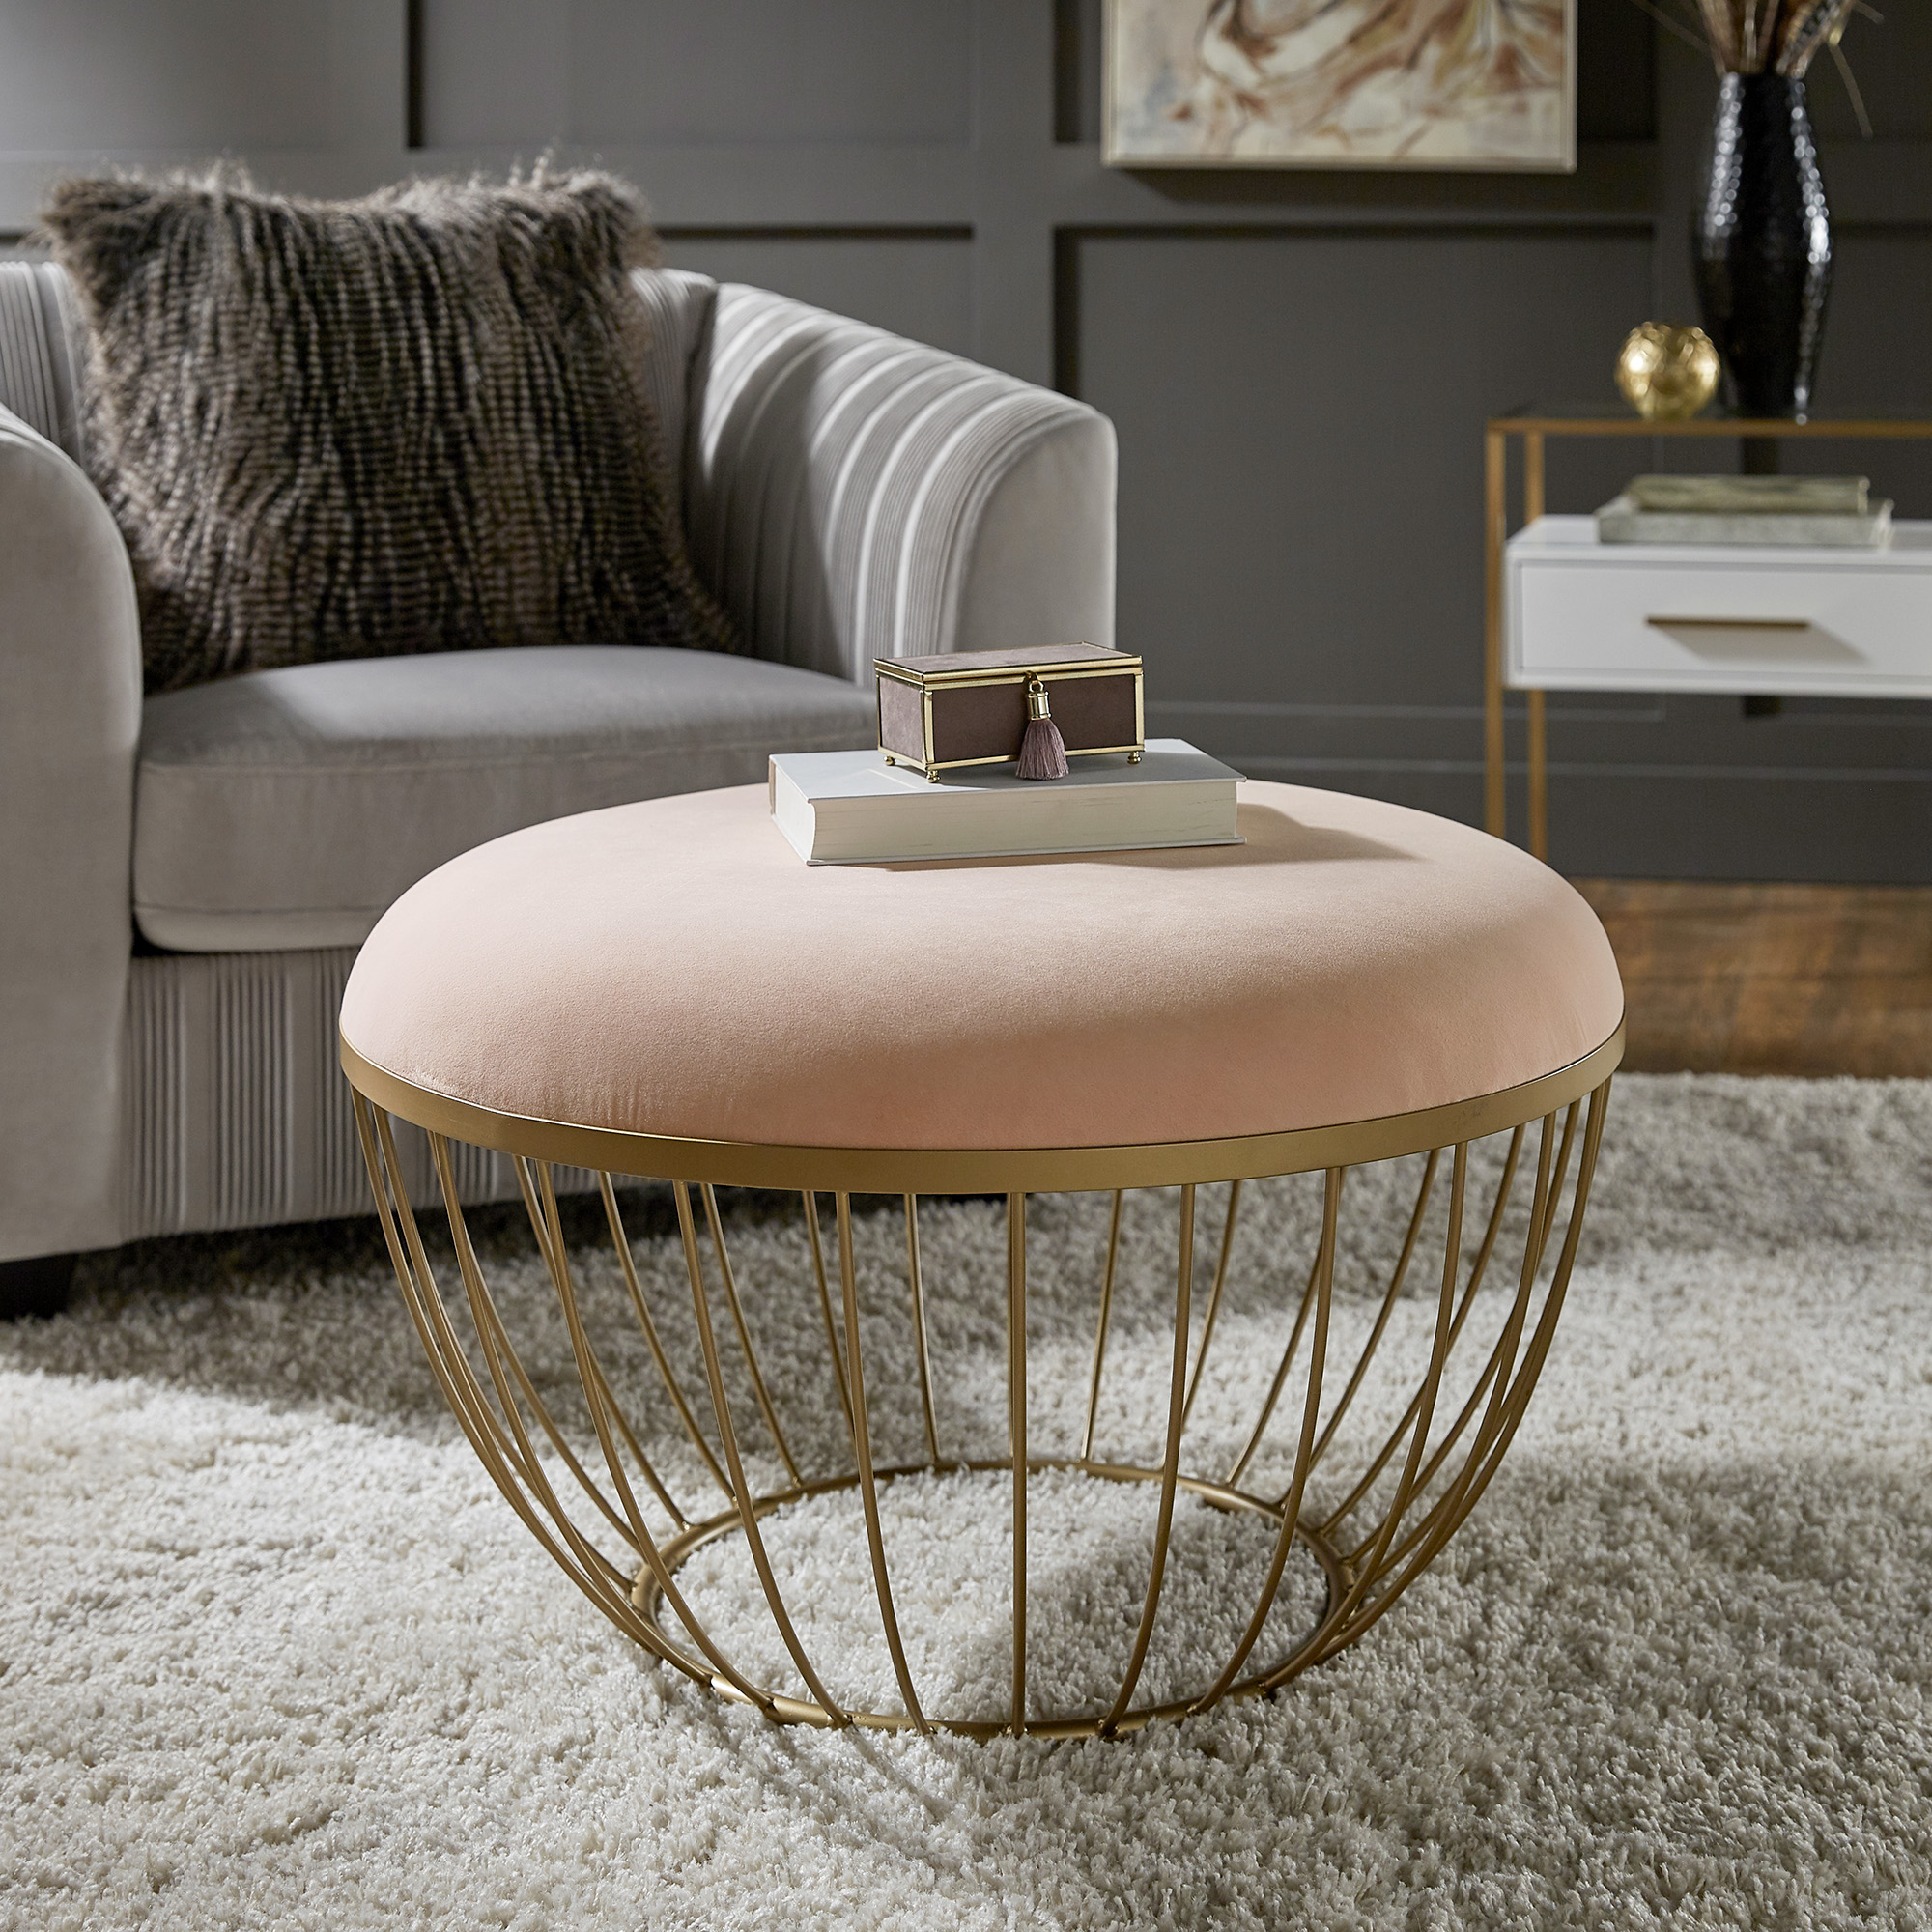 Fabric Upholstered Round Ottoman